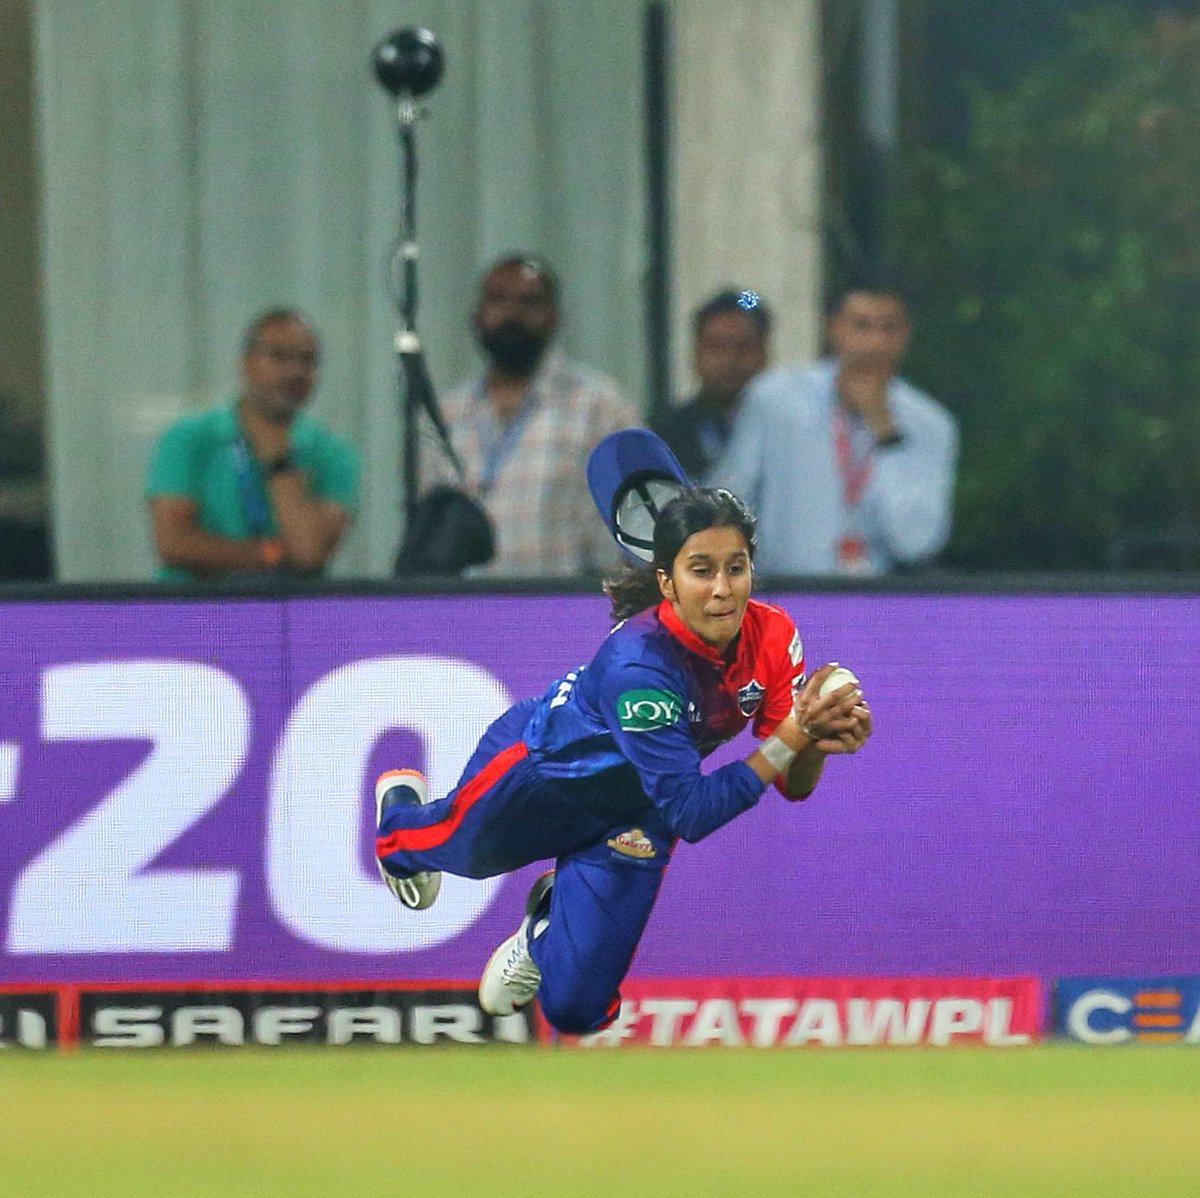 Flying like an Eagle 🦅 and grabbing like a Tiger 🐯 🔥🔥 Wow Jemmy🤌💕💕 What a catch!!!🤯🤯
#WomensIPL #MIvsDC #JemimahRodrigues